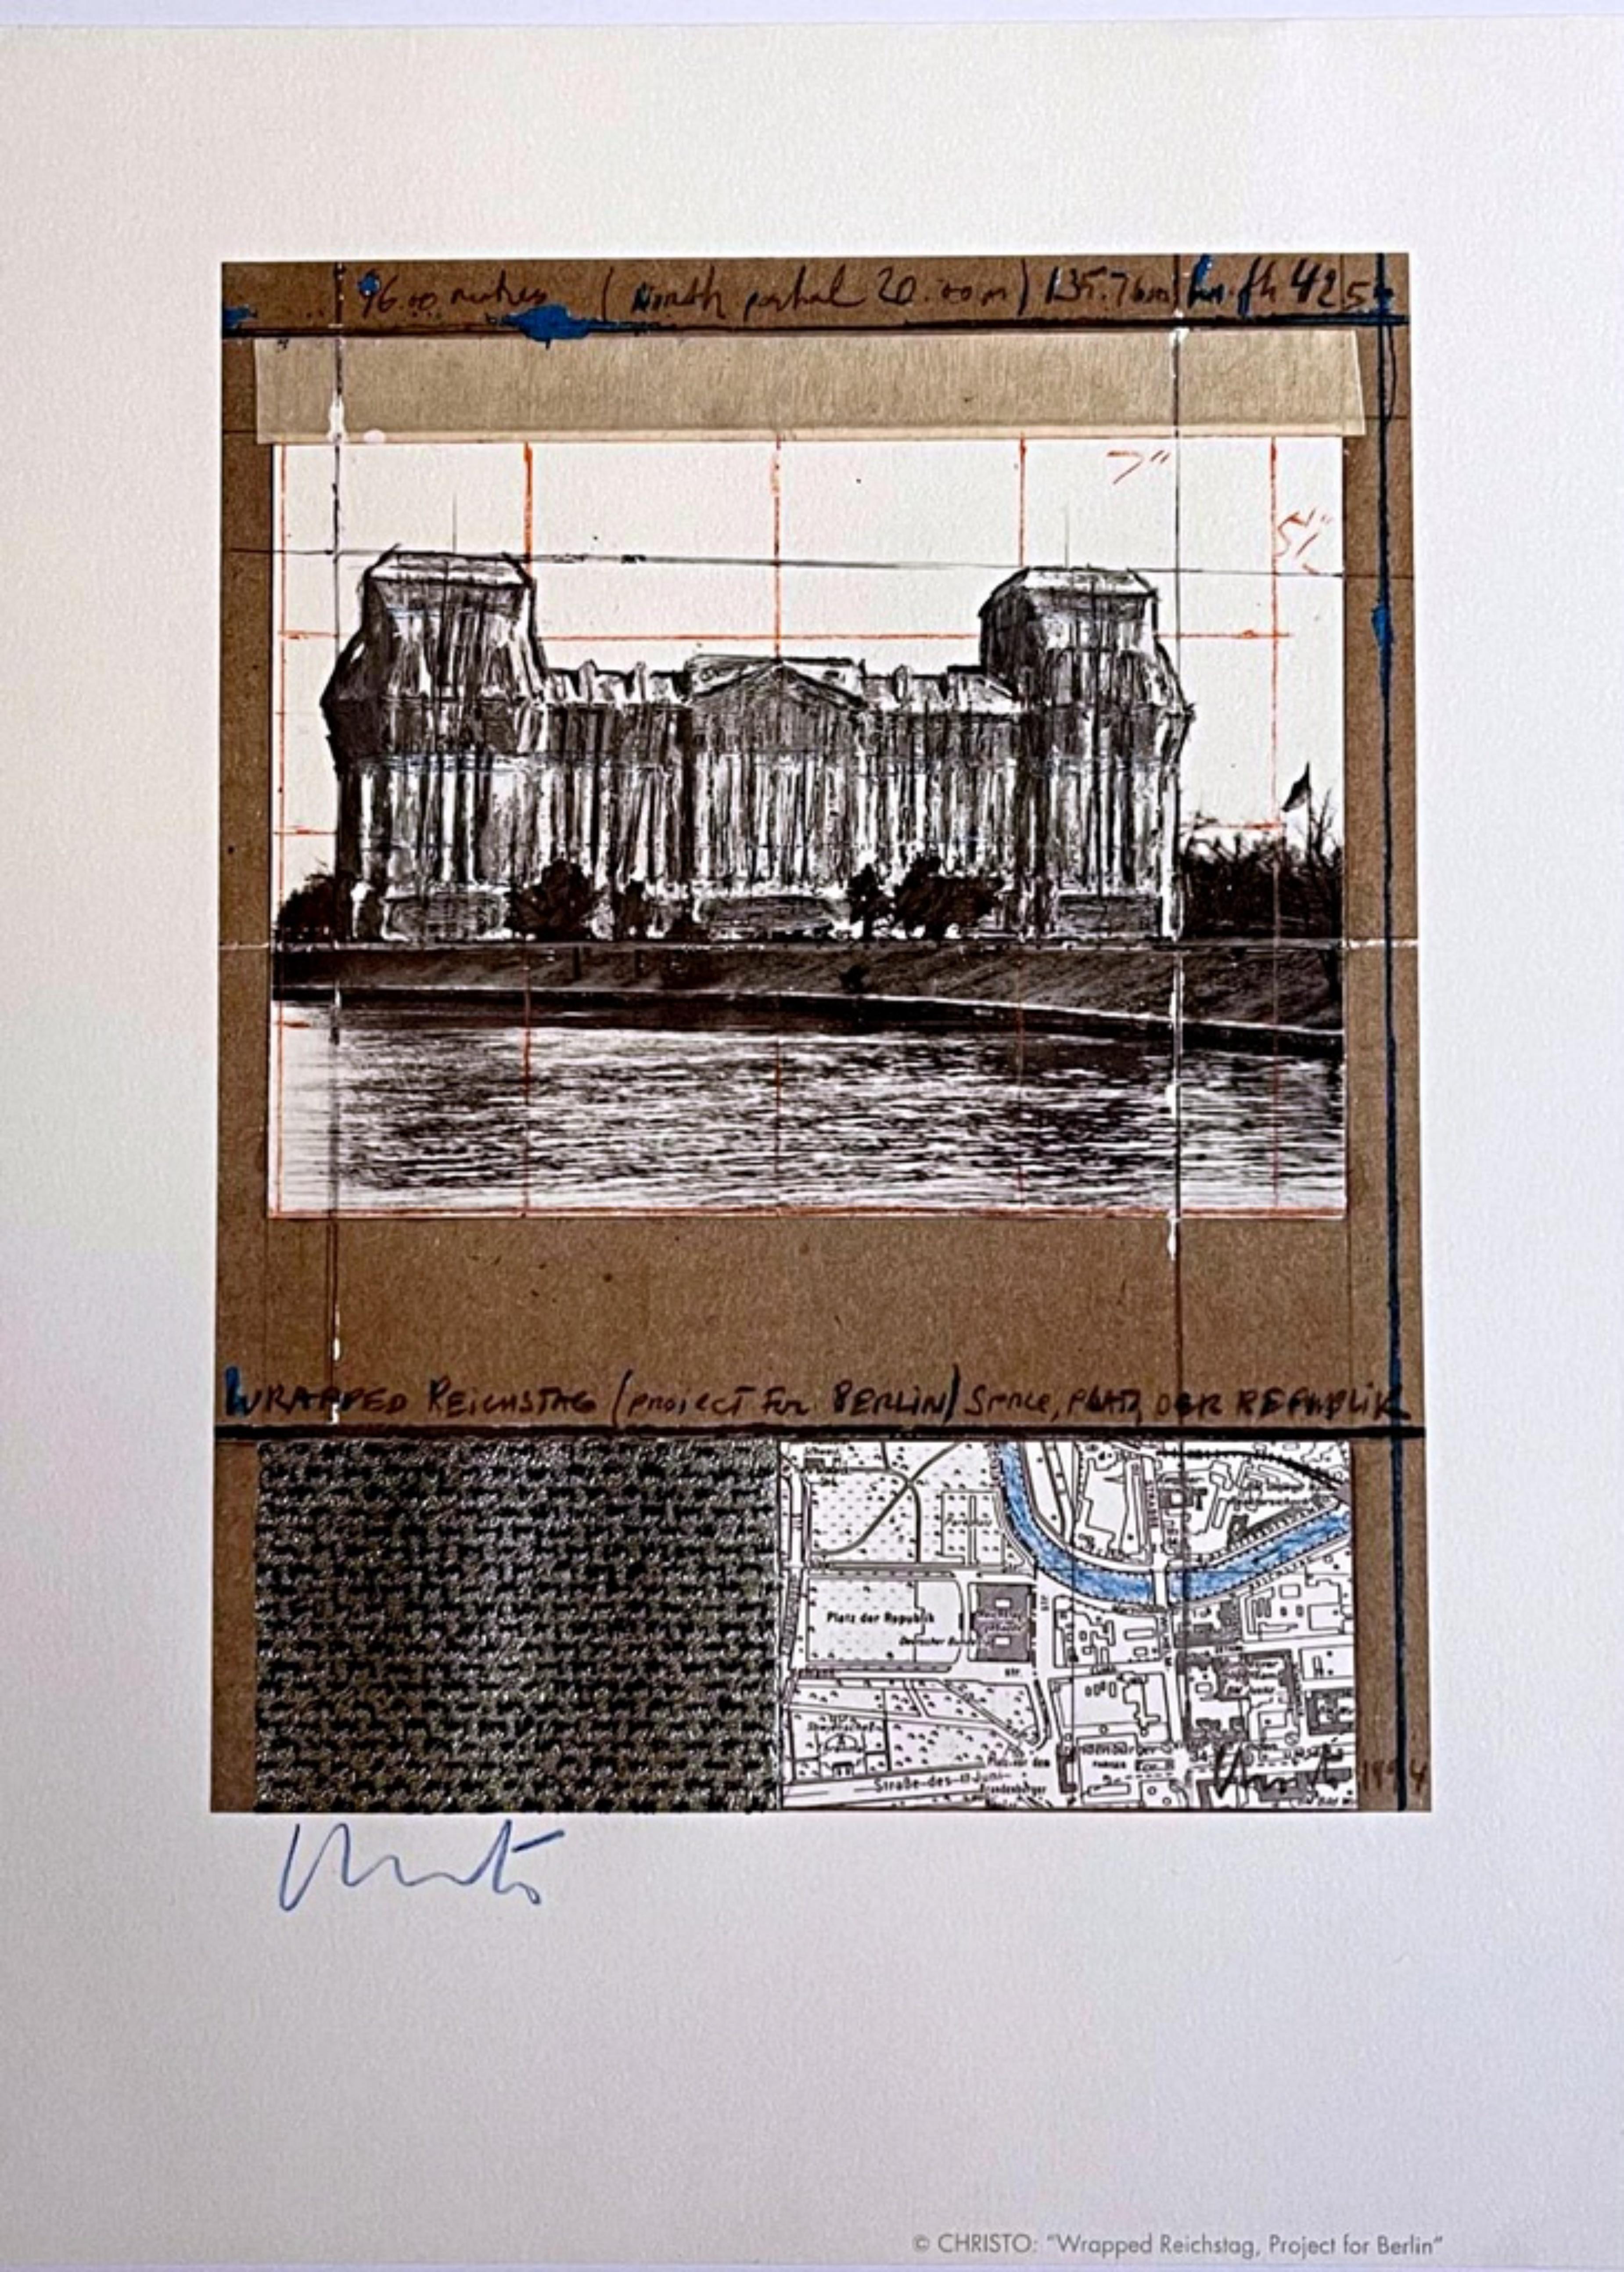 Wrapped Reichstag, Berlin, collage with raised thermal silver paper, hand signed